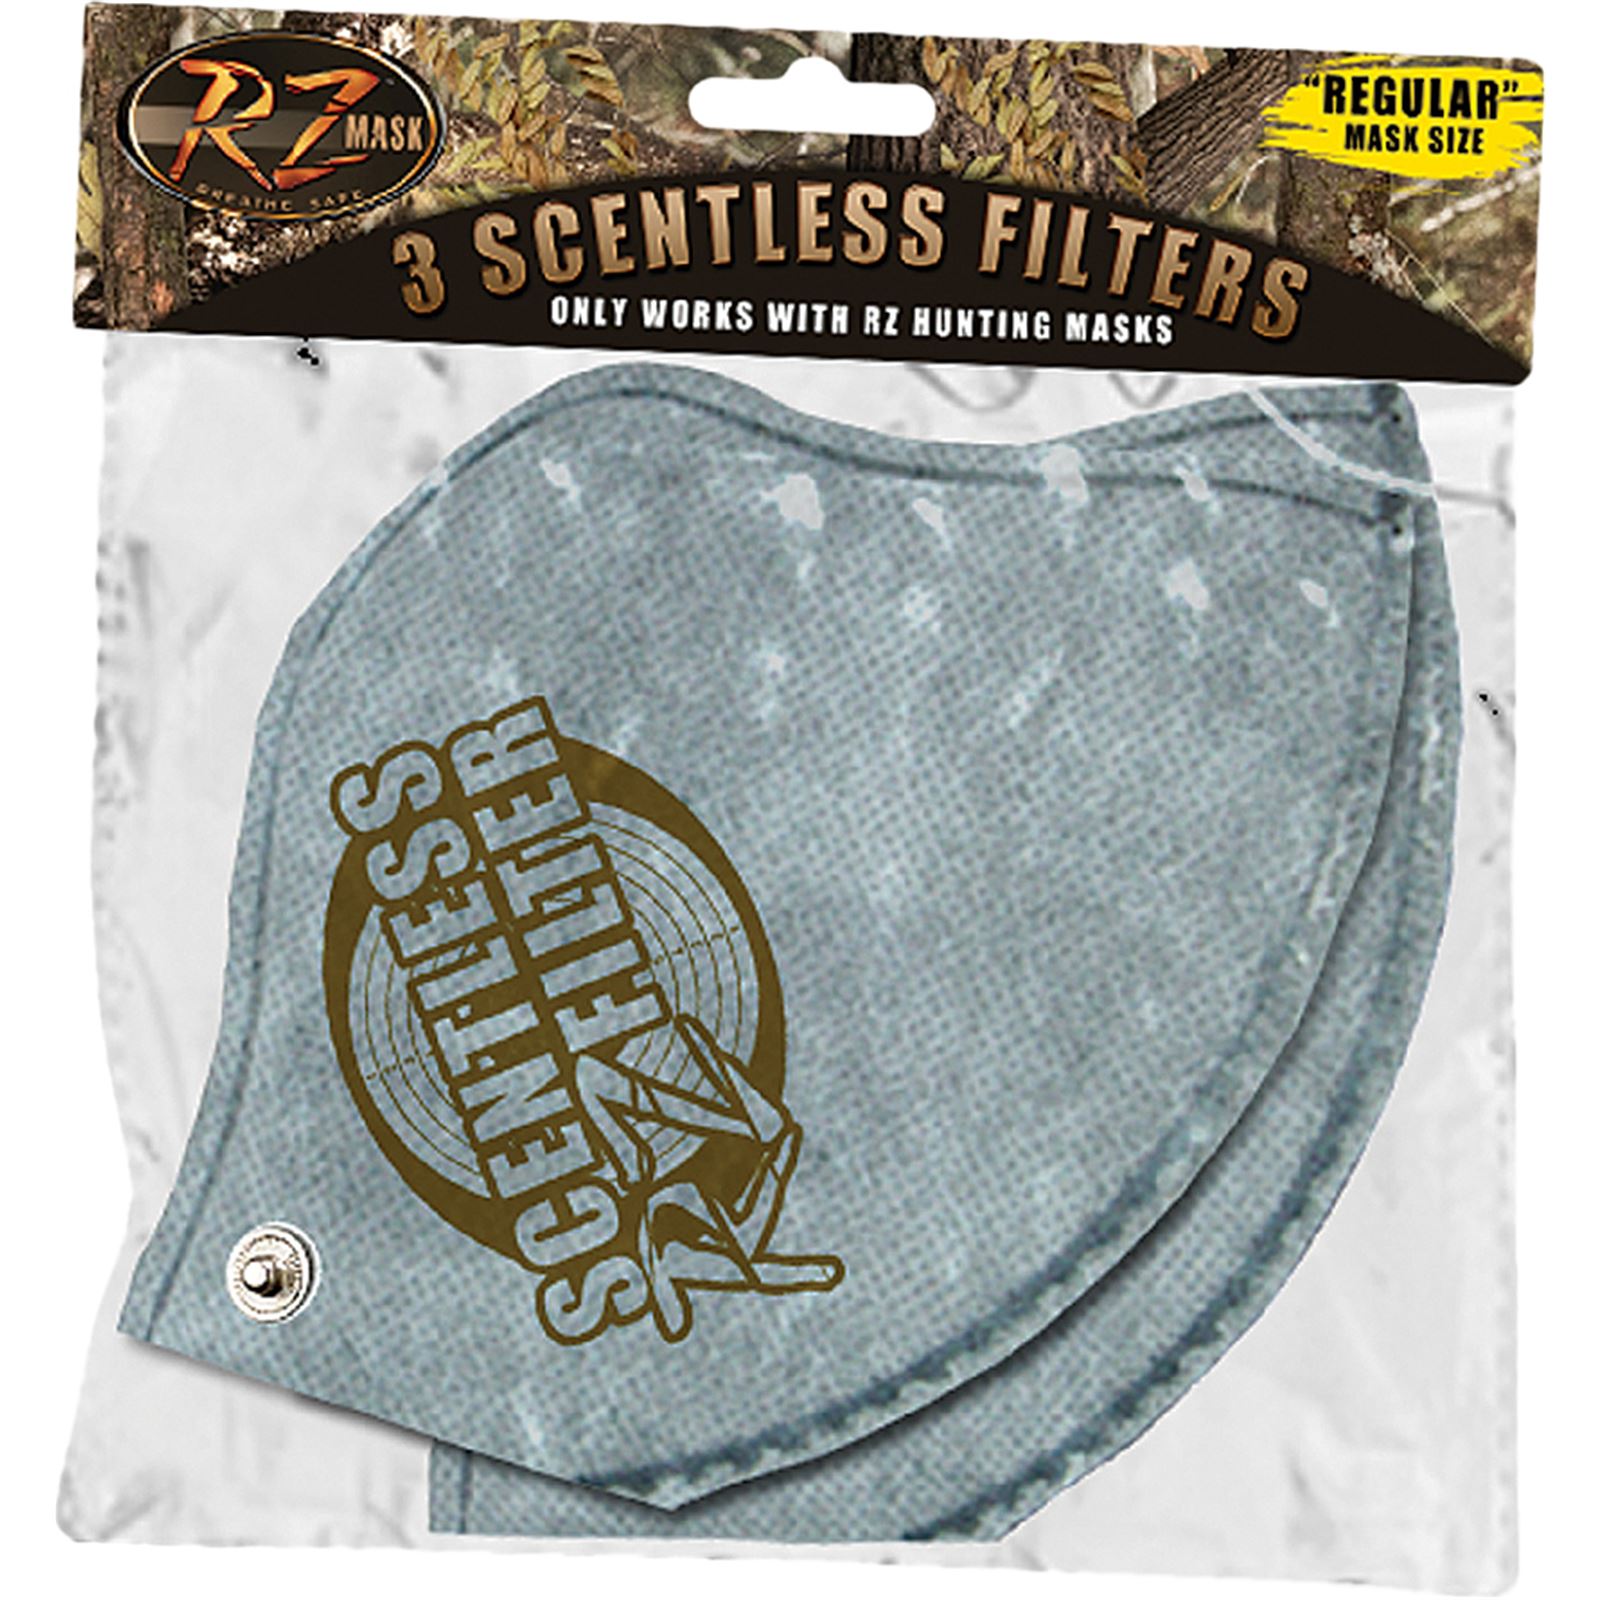 RZ Mask Scentless Filters